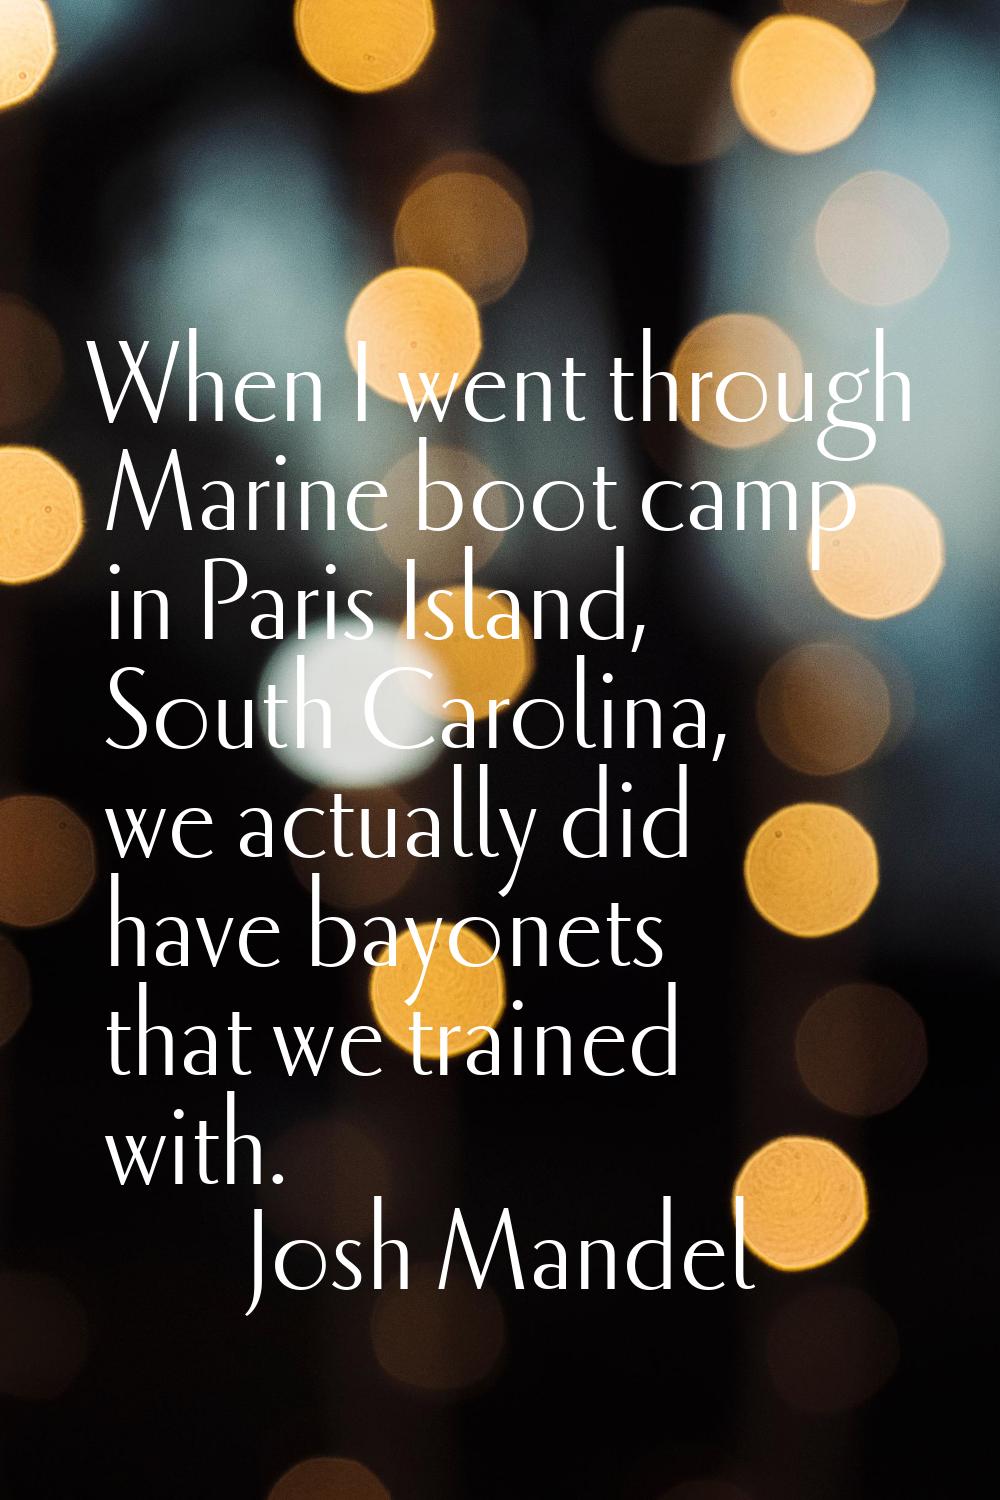 When I went through Marine boot camp in Paris Island, South Carolina, we actually did have bayonets